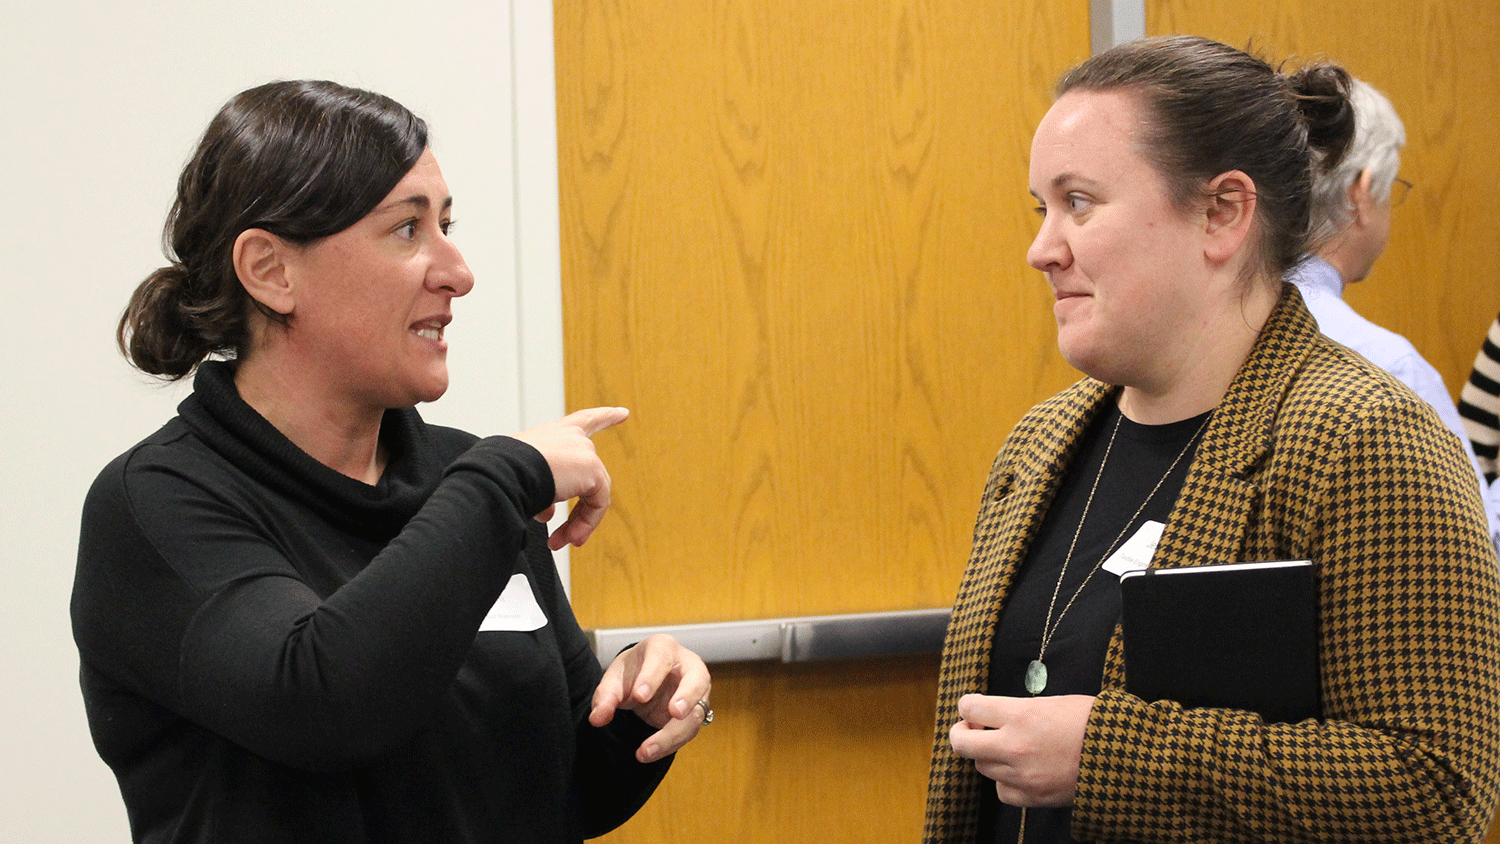 Ross Sozzani, an associate professor in Plant and Microbial Biology, talks with Jessica Gluck, an assistant professor of Textile Engineering, during the Nov. 13 ideation session